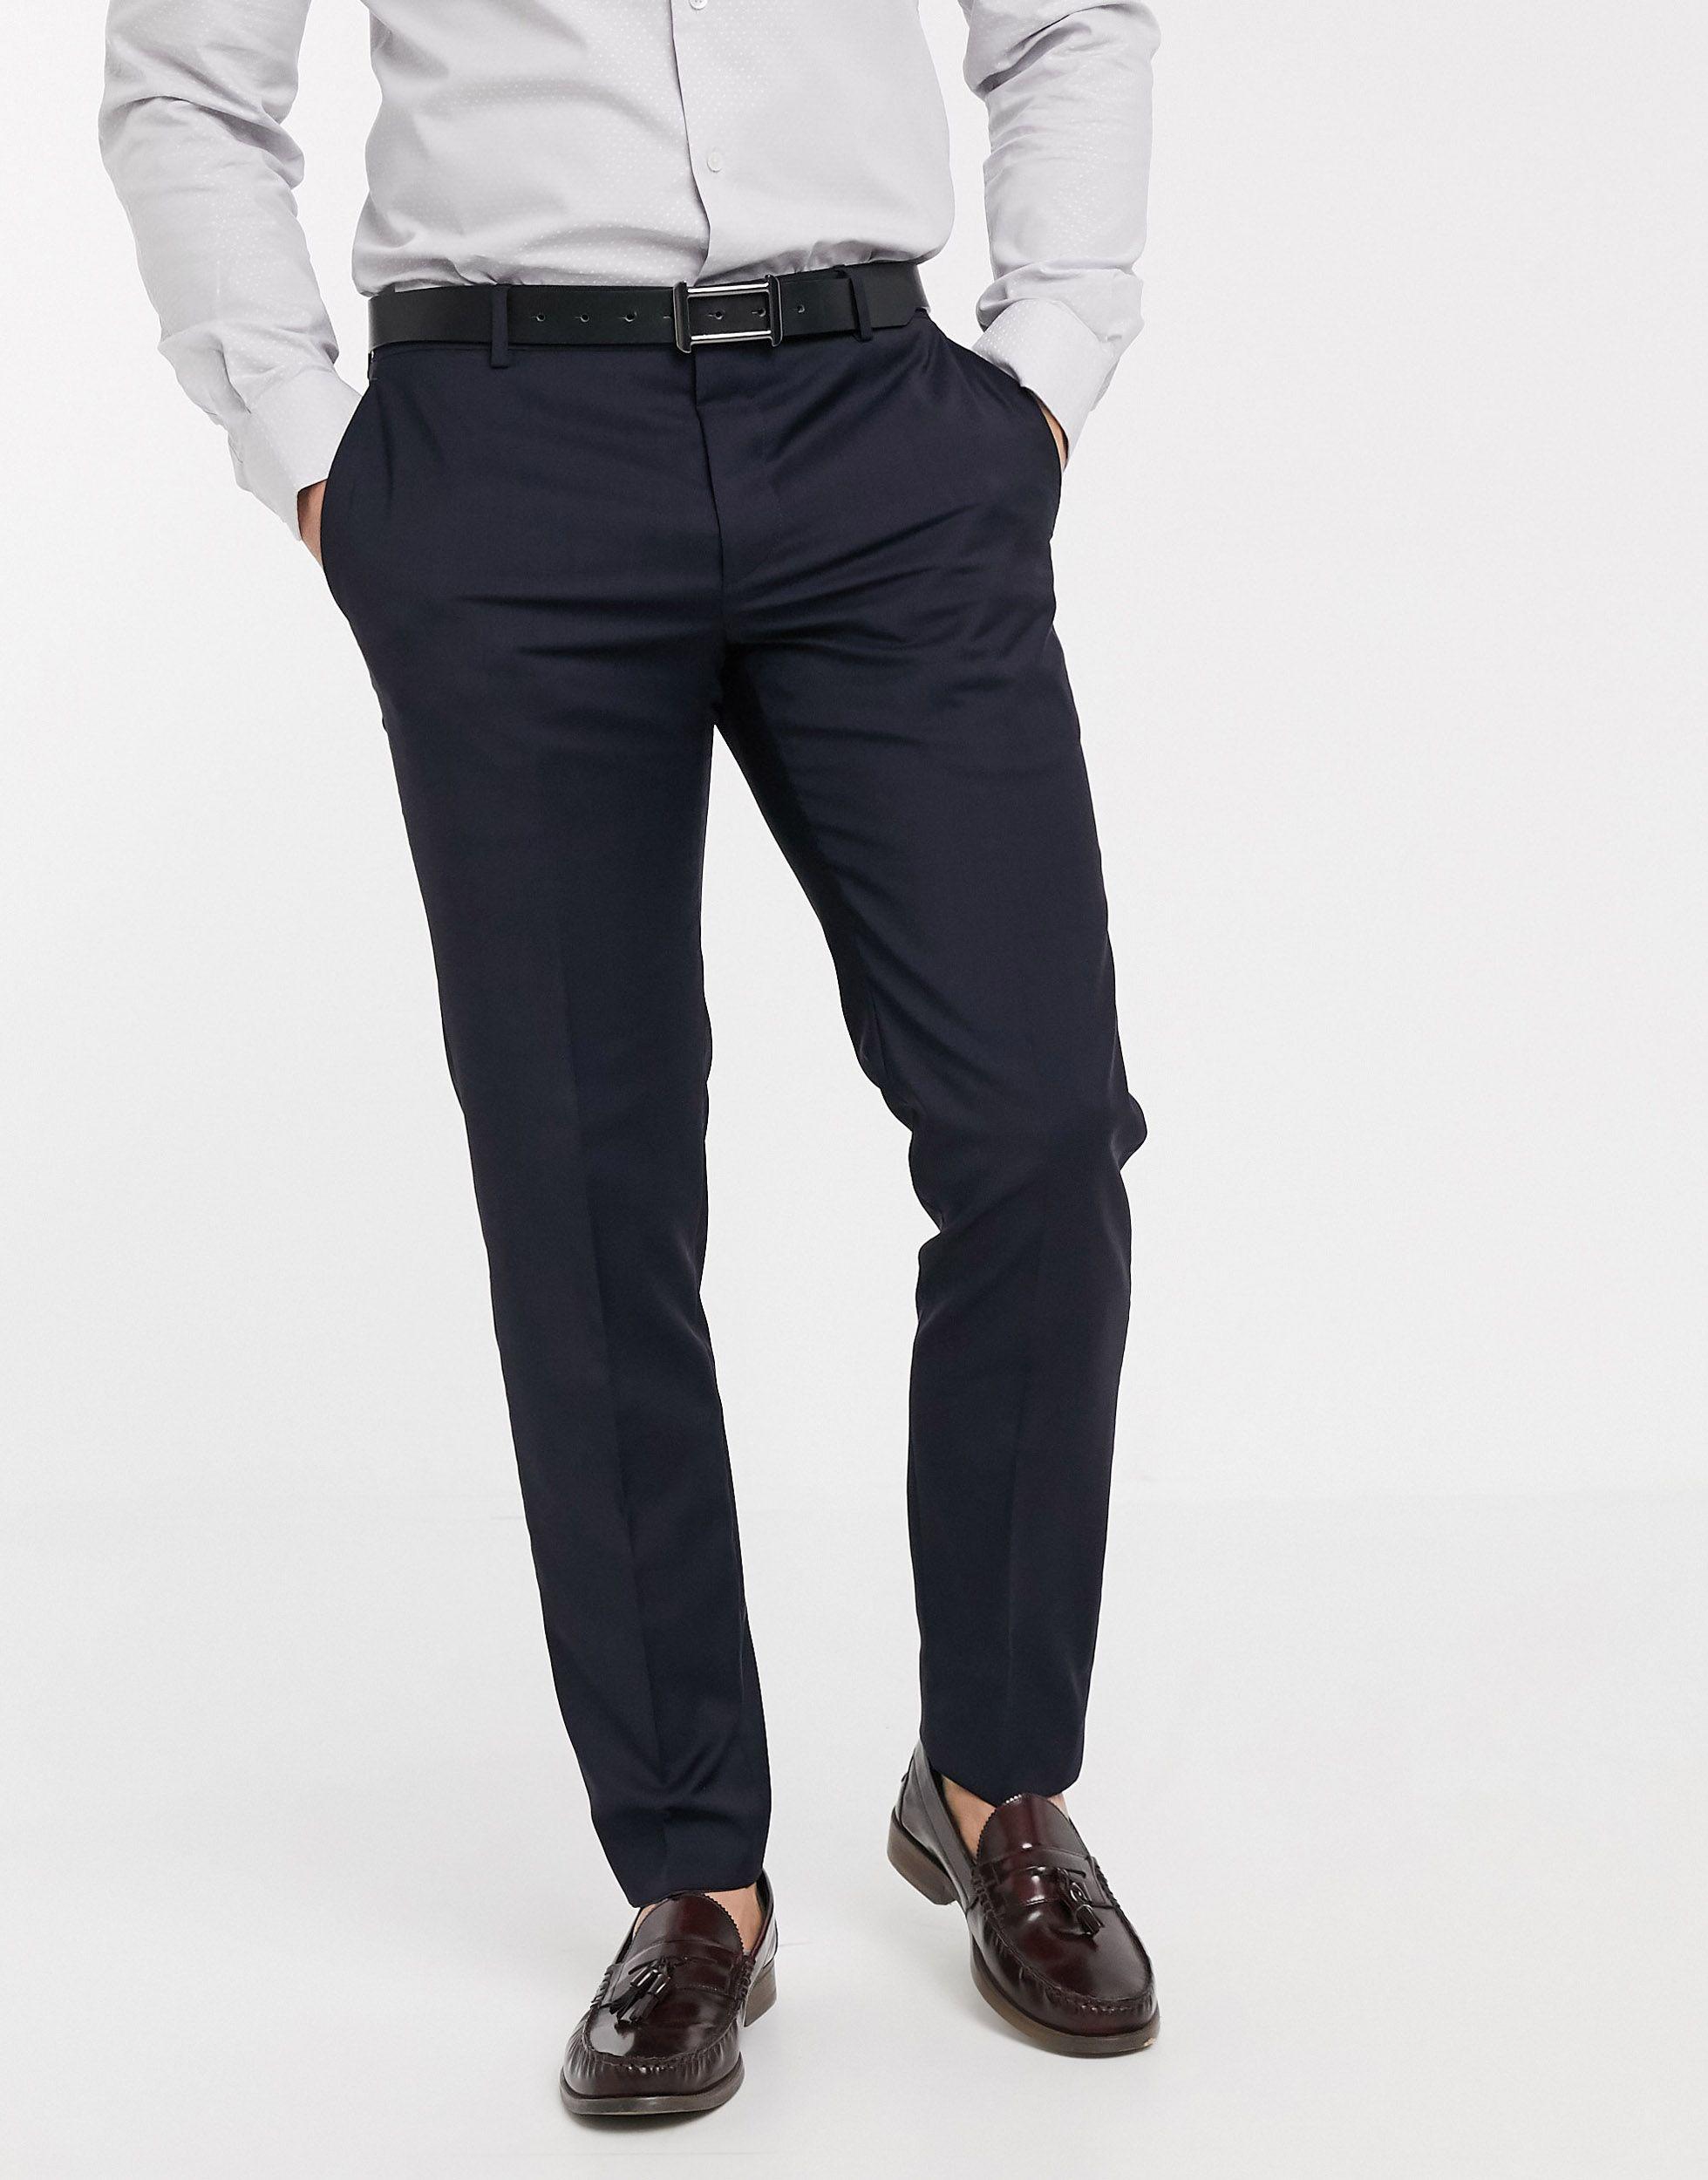 Slacks and Chinos Formal trousers Blue for Men Mens Clothing Trousers Calvin Klein Multicolour Wool Slim Fit Suit Trousers in Navy 